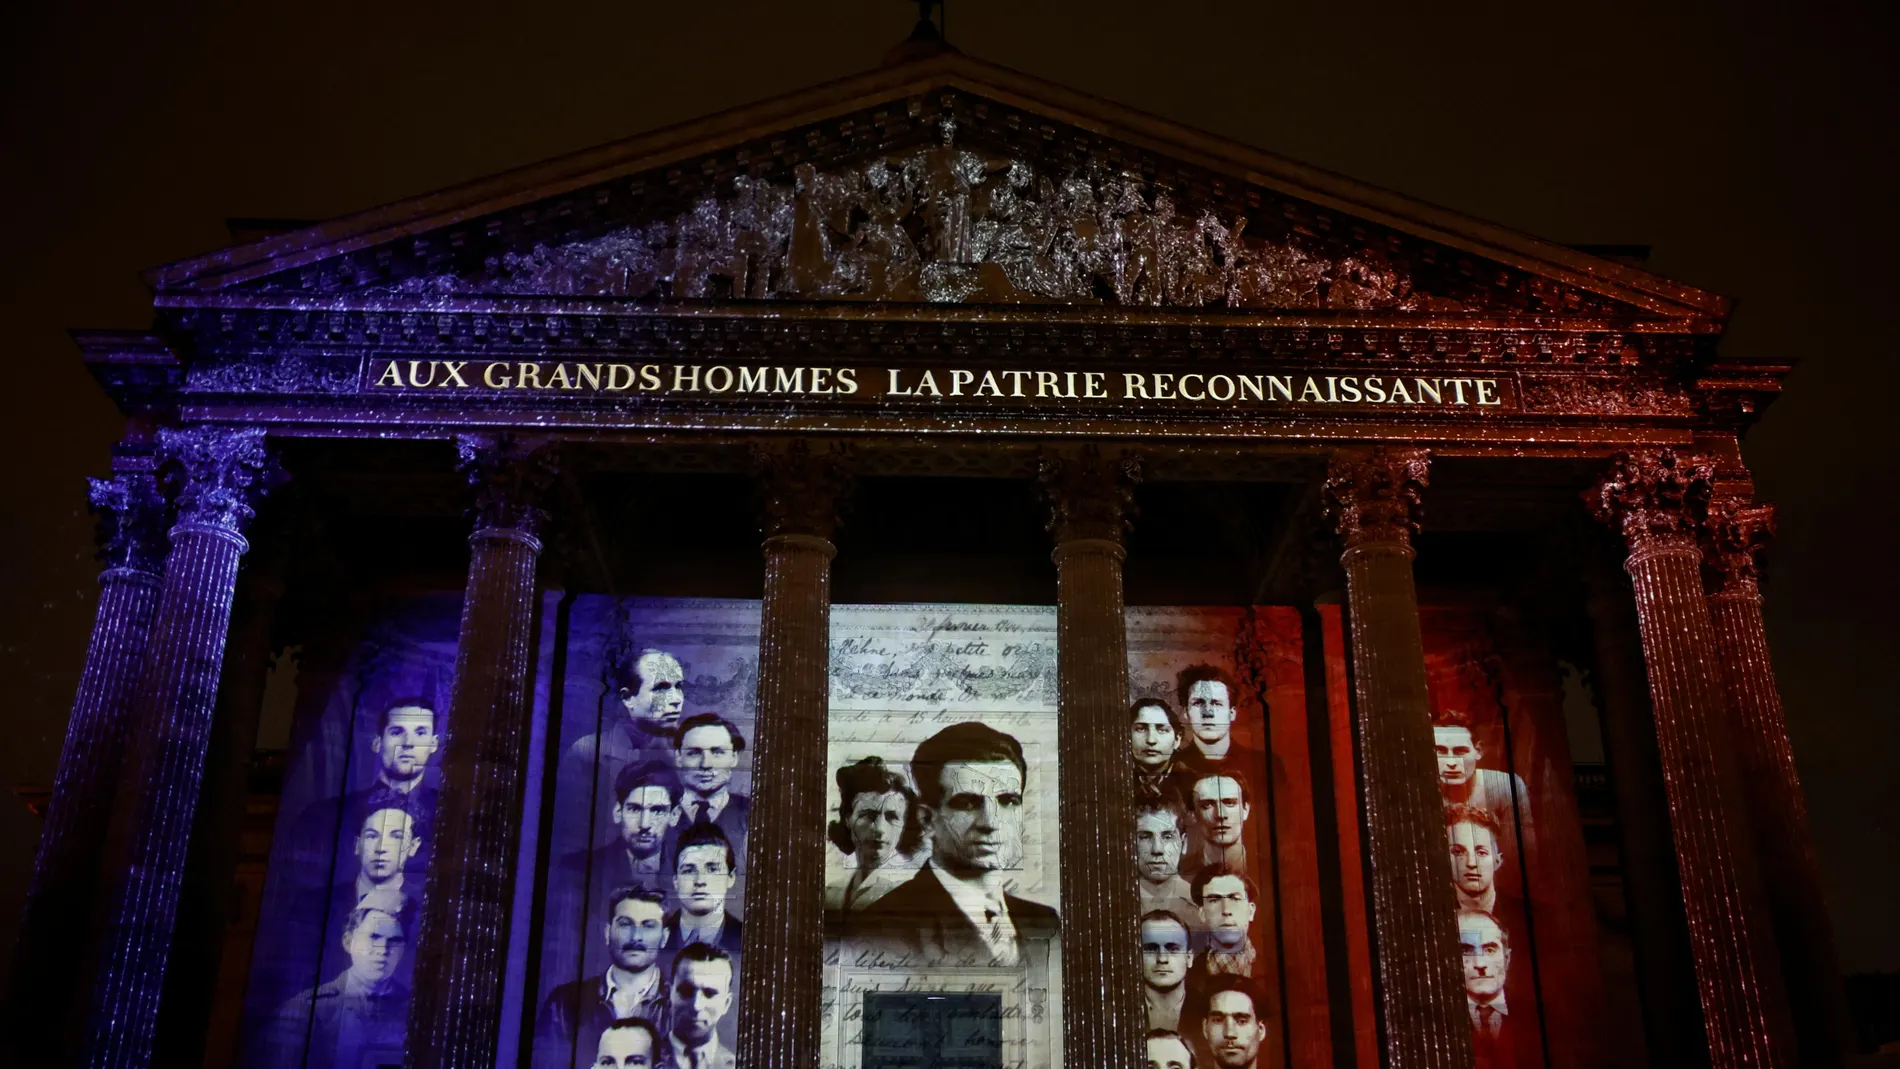 Paris (France), 21/02/2024.- Photographs of Missak and Melinee Manouchian, and his 23 resistance comrades of the FTP-MOI, are projected on the Pantheon illuminated with the colors of the French flag during the induction ceremony for Missak Manouchian, Armenian poet and communist fighter who became a figure of the World War II Resistance and who was executed at the Mont-Valerien in February 1944, and his 23 resistance comrades, into the Pantheon, where key figures from France's history are hon...